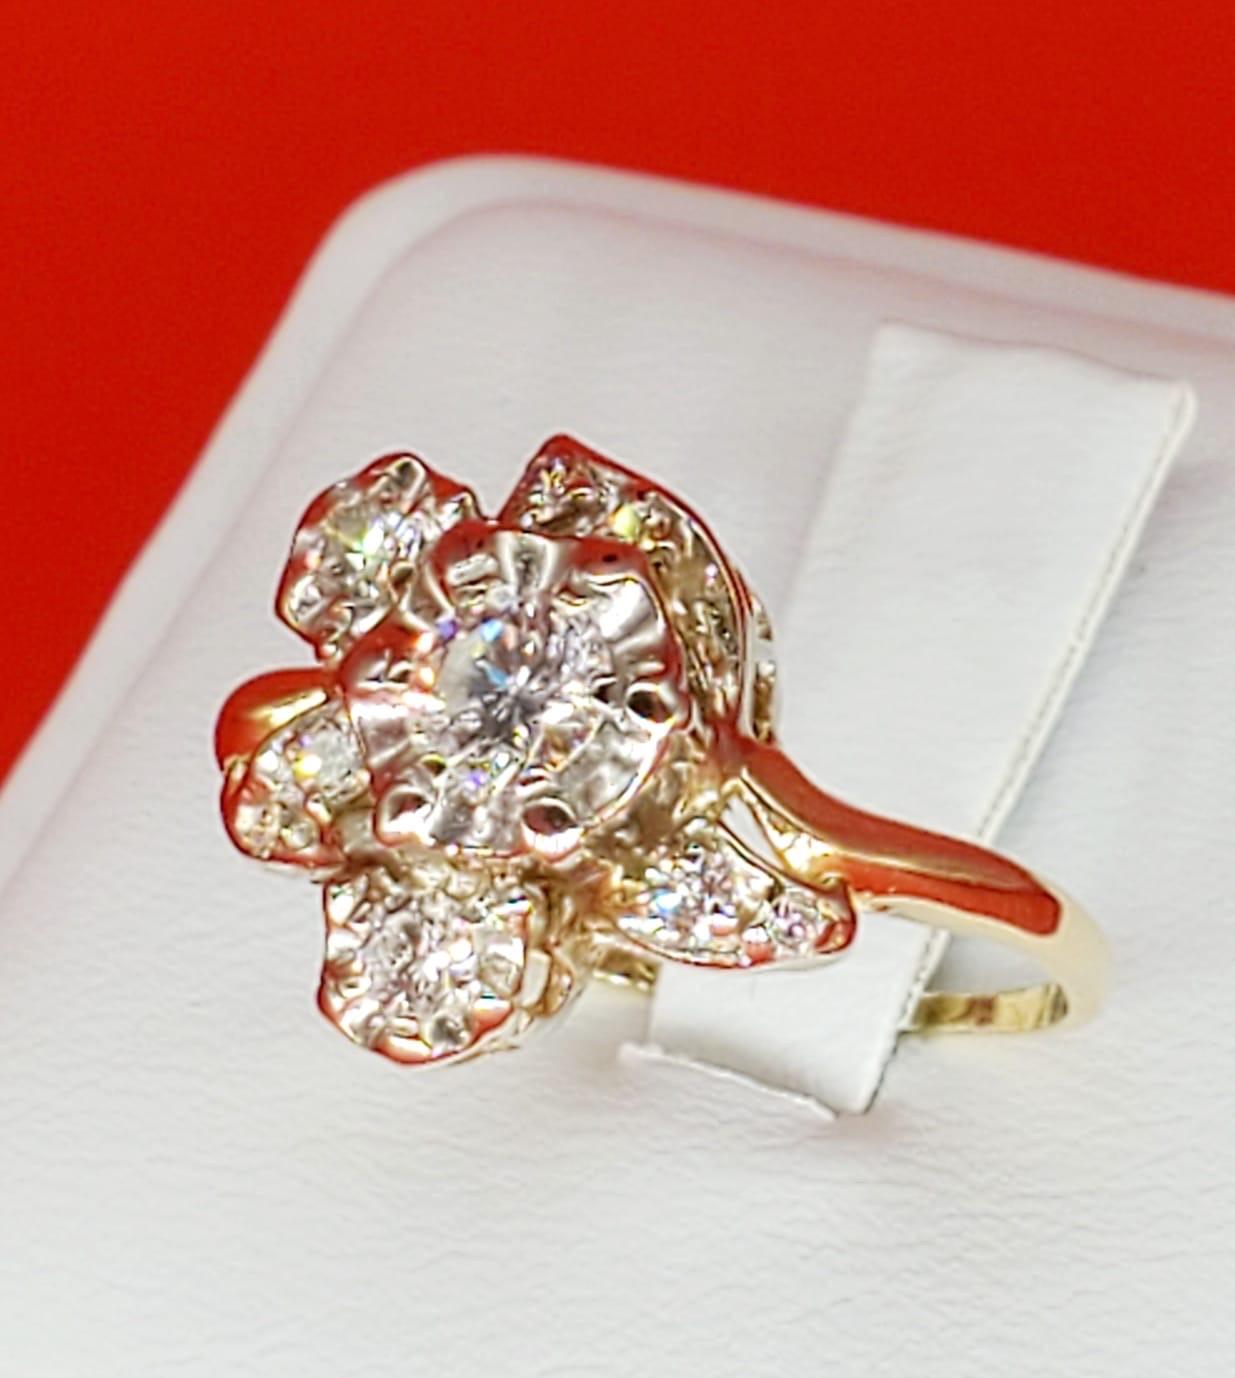 Vintage 1 Carat Diamonds Flower Cluster Ring. The ring is well assembled and crafted with two-tone 18k gold making the diamonds stand out from every angle of the ring. There is a an approx total of 1 carat in diamonds that are clean and white. The